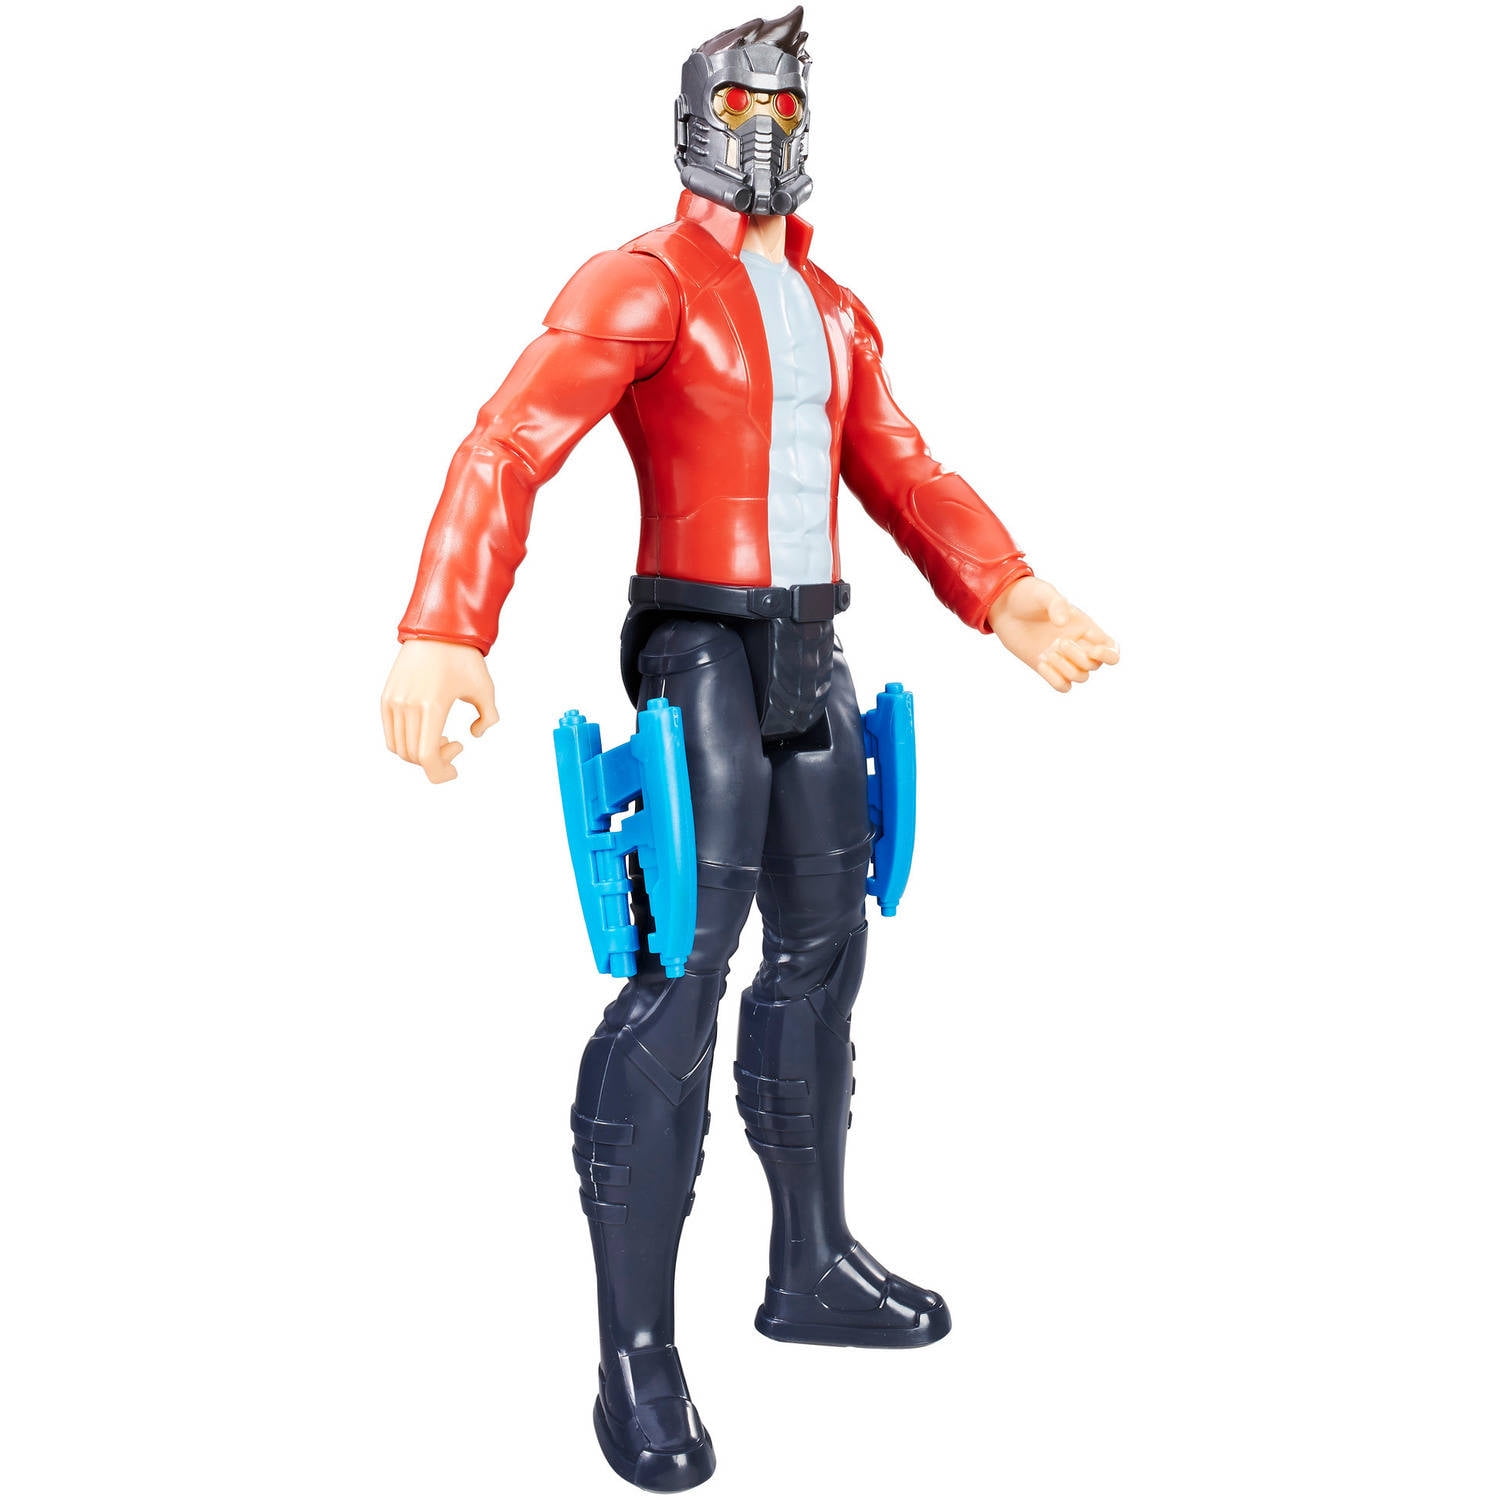 Starlord Peter Quill Guardians of the Galaxy Figure from Titan Hero Series 